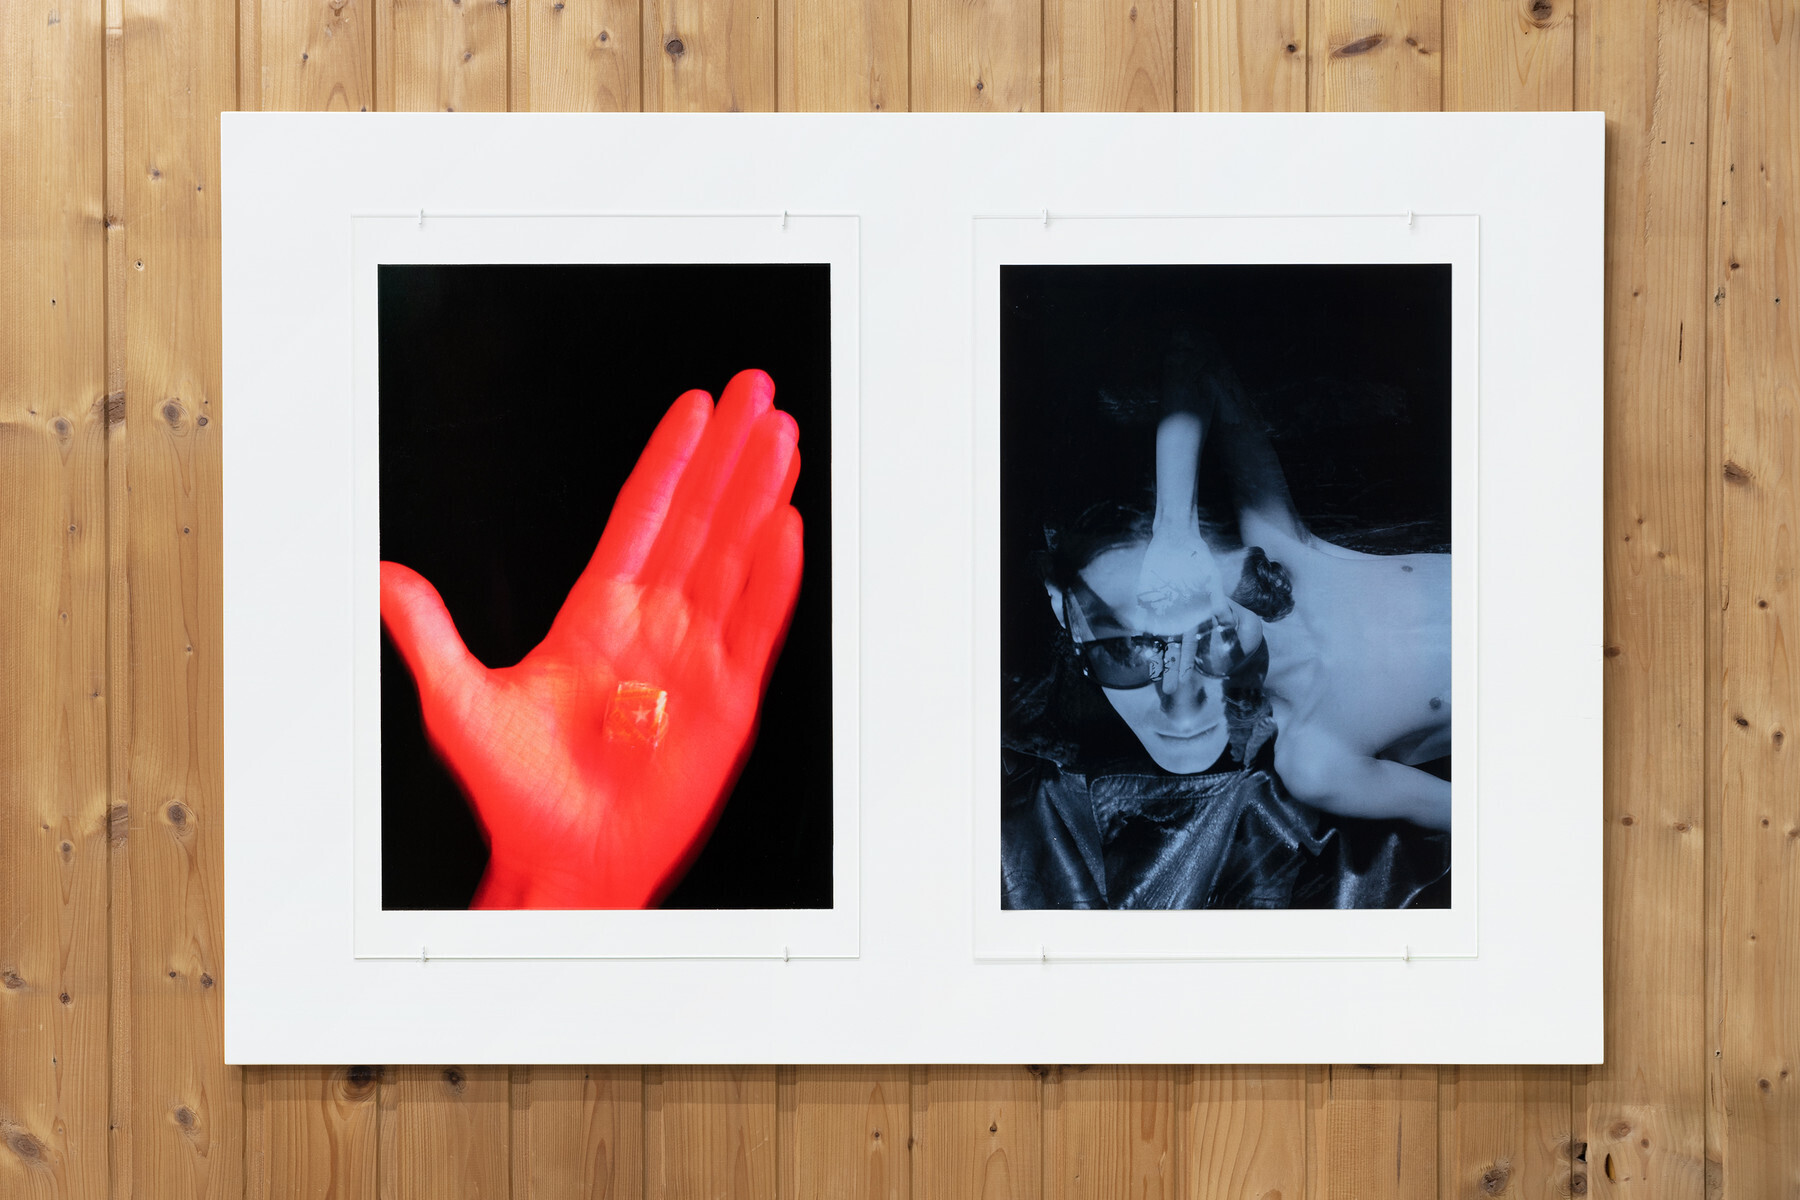 Luki von der Gracht: What Do You See? I See Desire, 2019 & Going Back To Who I Am, 2013. Inkjet print on studio satin paper, 42 x 29 cm each